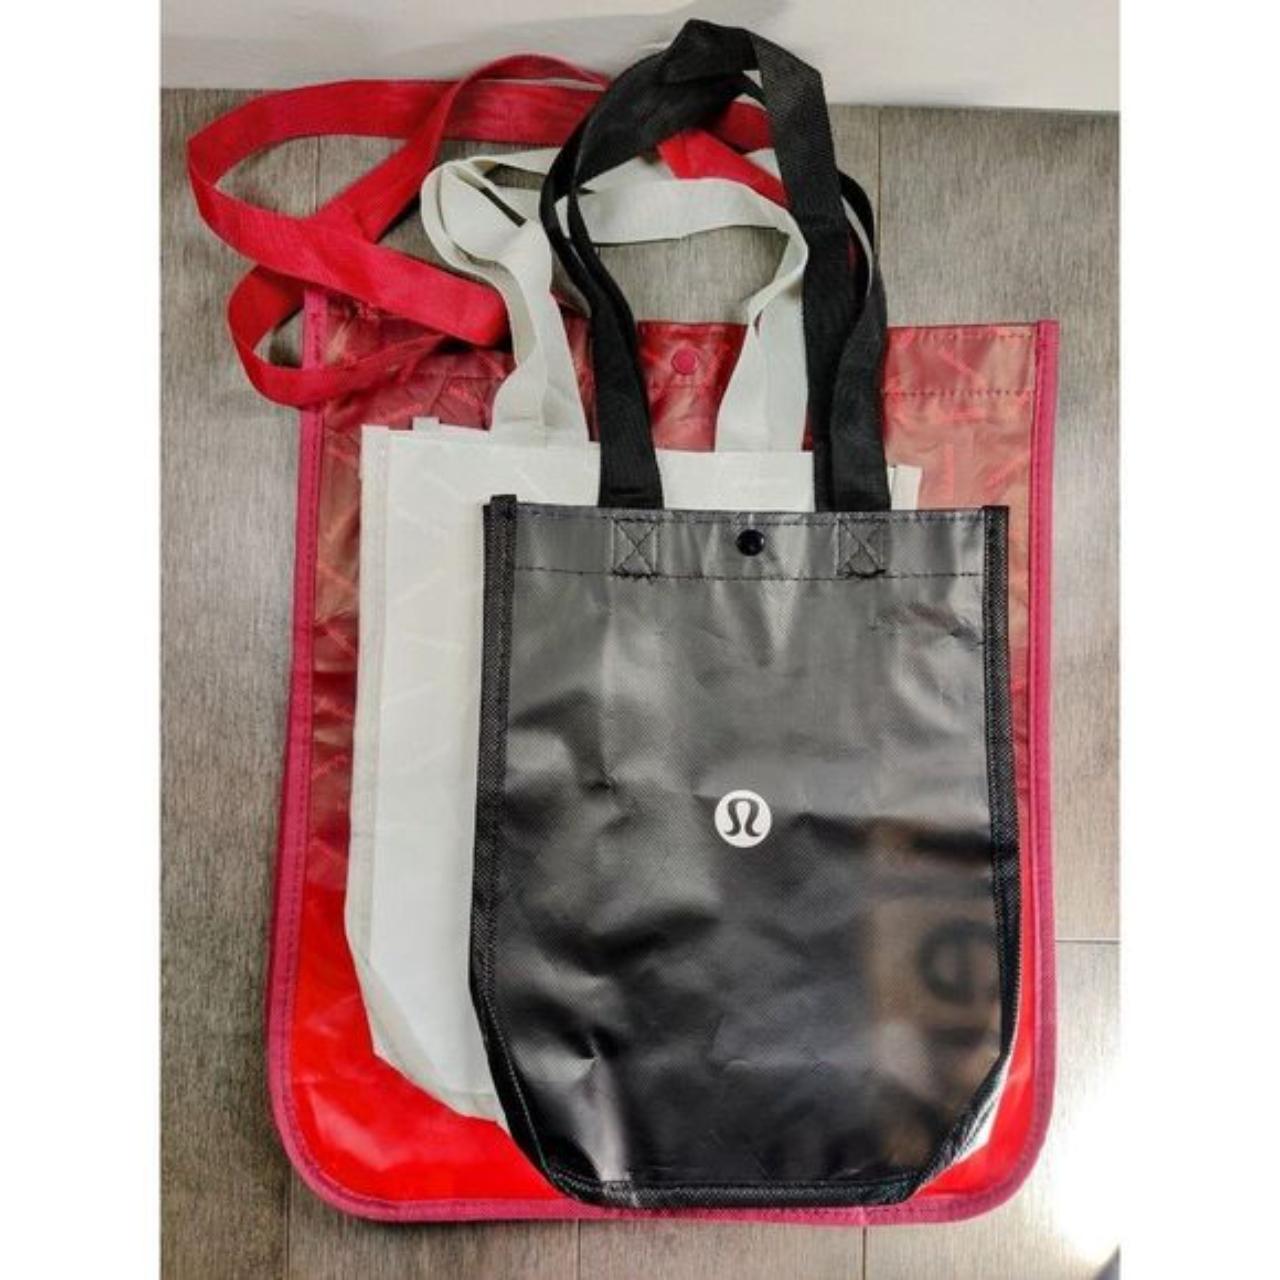 Bundle of 2 Lululemon shopping bags size small black and red color